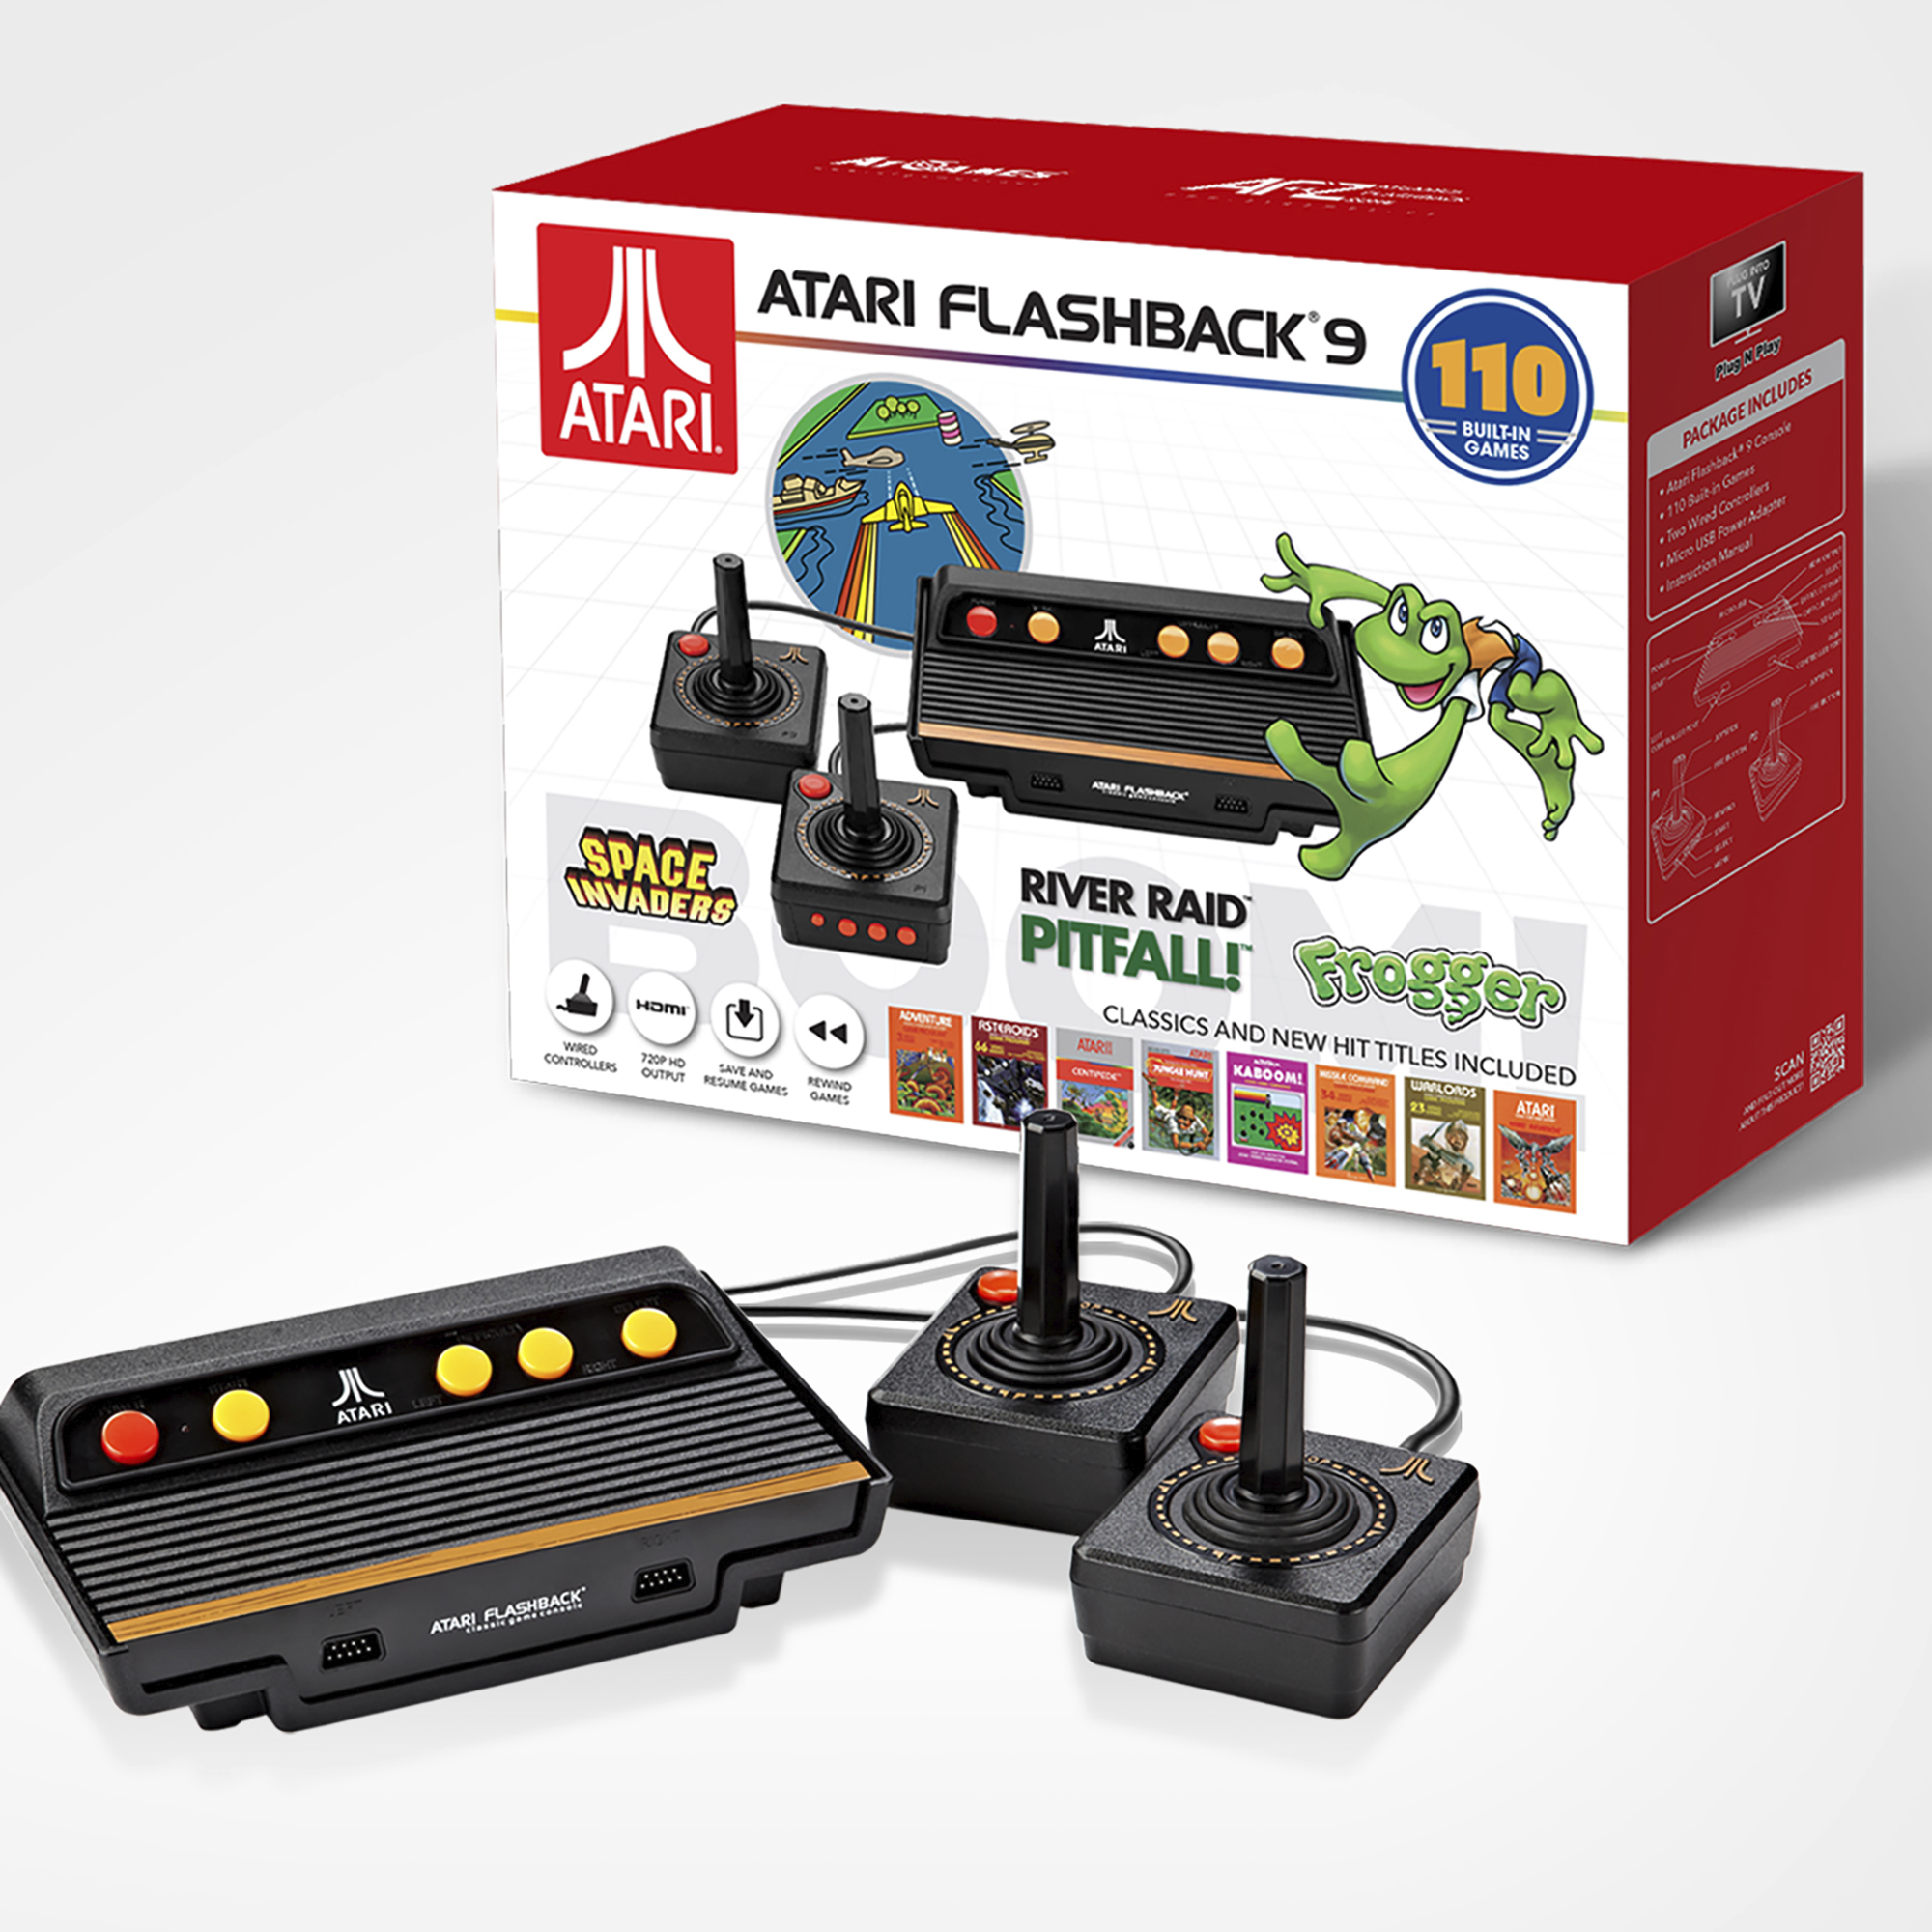 Atari Flashback 9, HDMI Game Consoles, 110 Games, Wired Joystick Controllers, Black, AR3050 - image 5 of 7